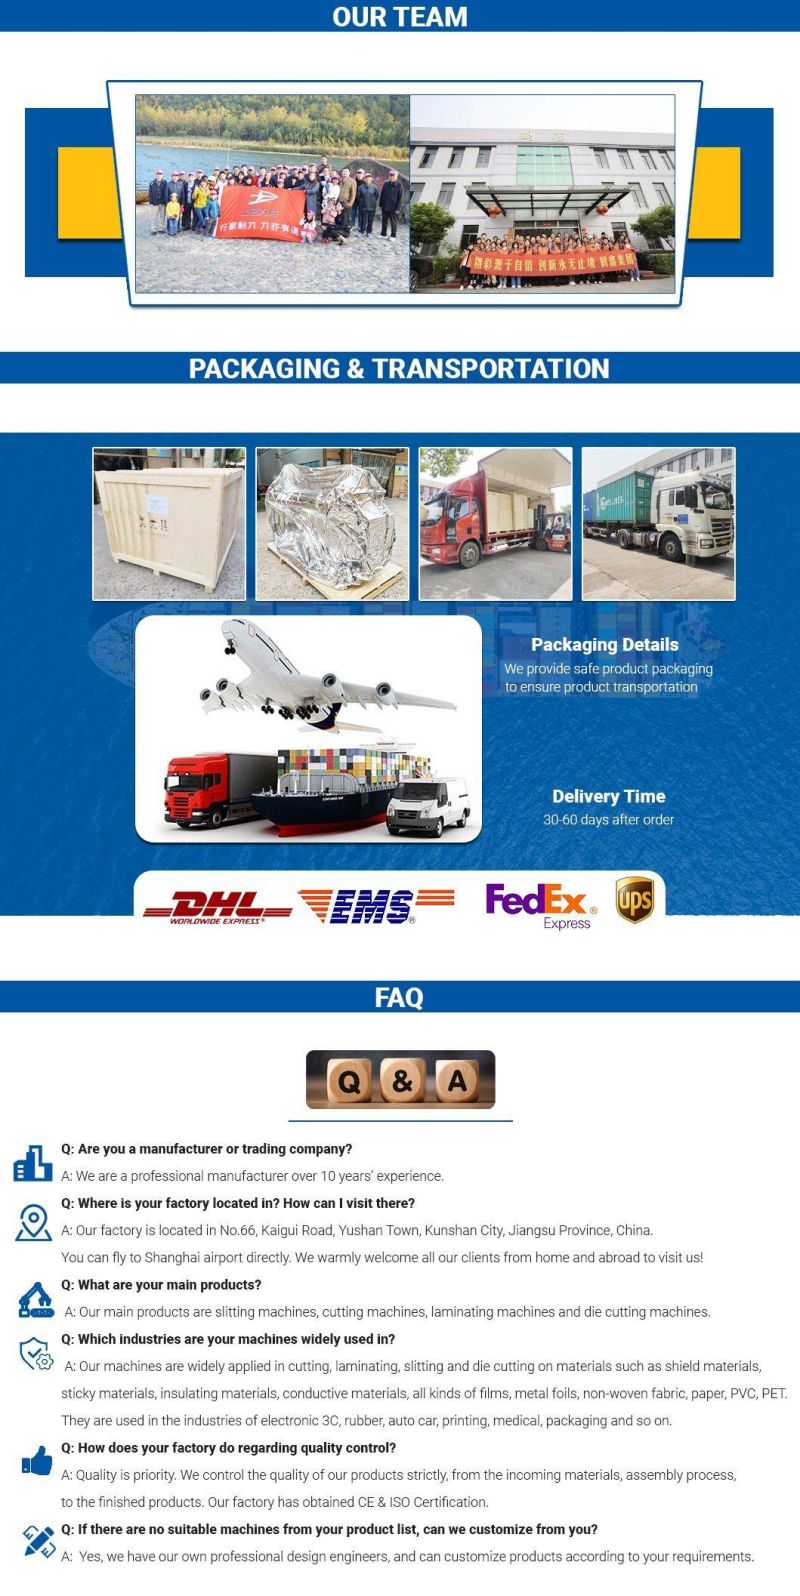 CE ISO Double-Blade Plywood Case Cutter Cutting and Slitting Machine